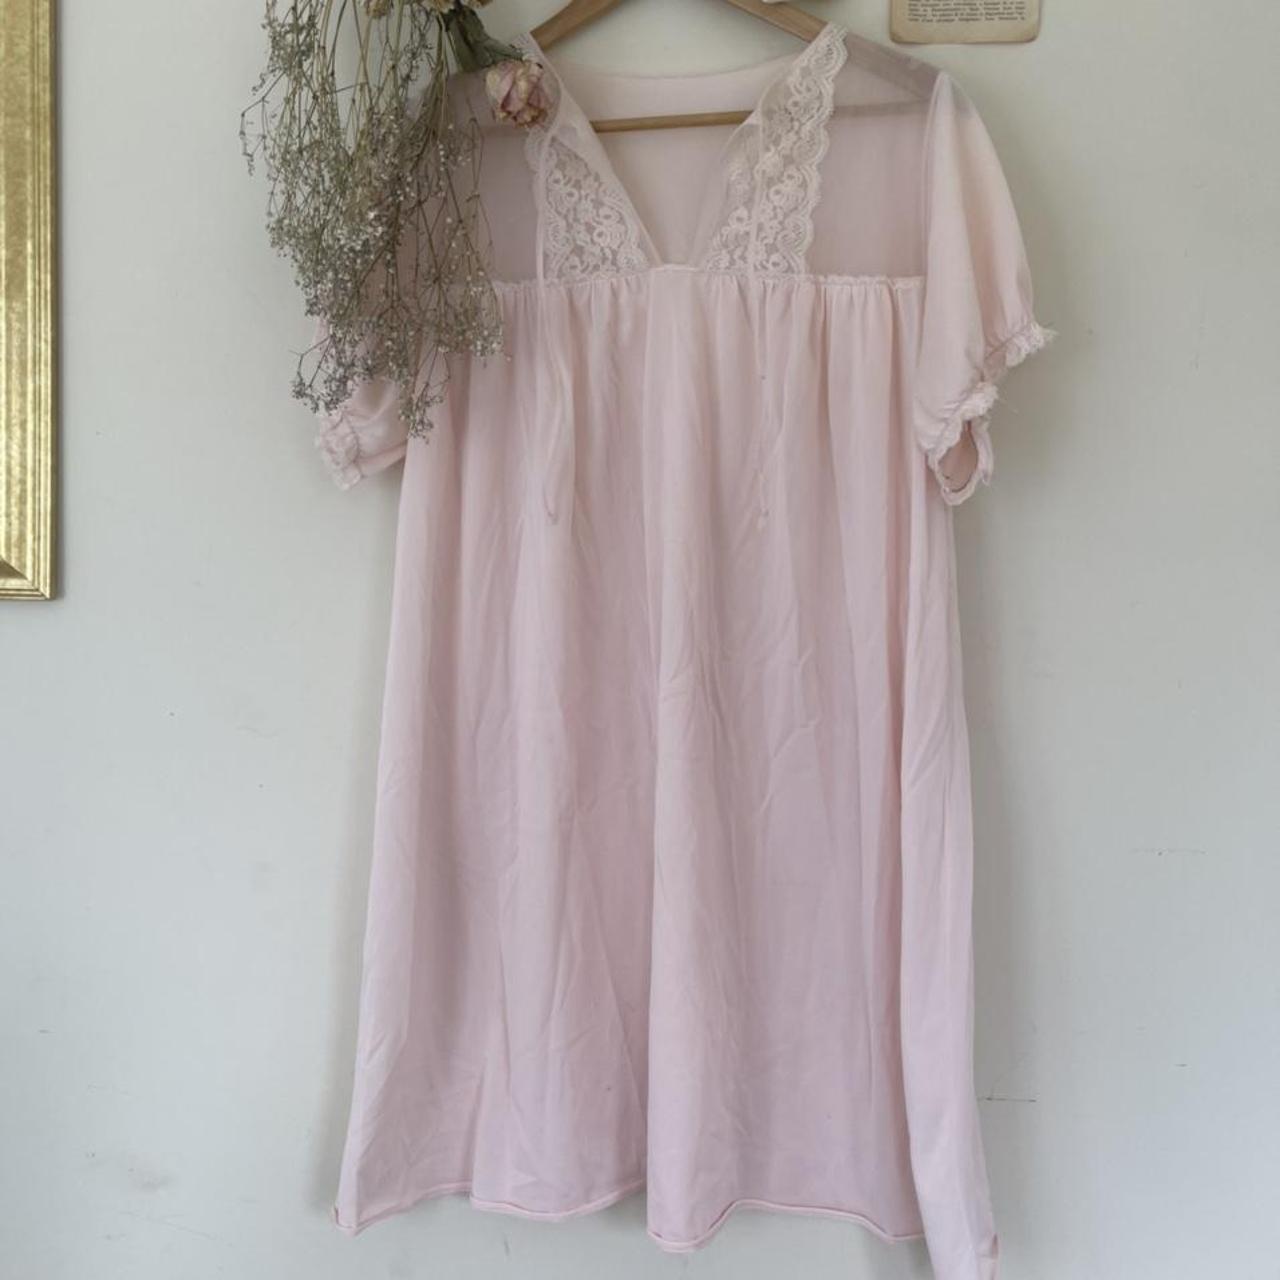 Vintage babydoll nightgown. No tags but would best... - Depop